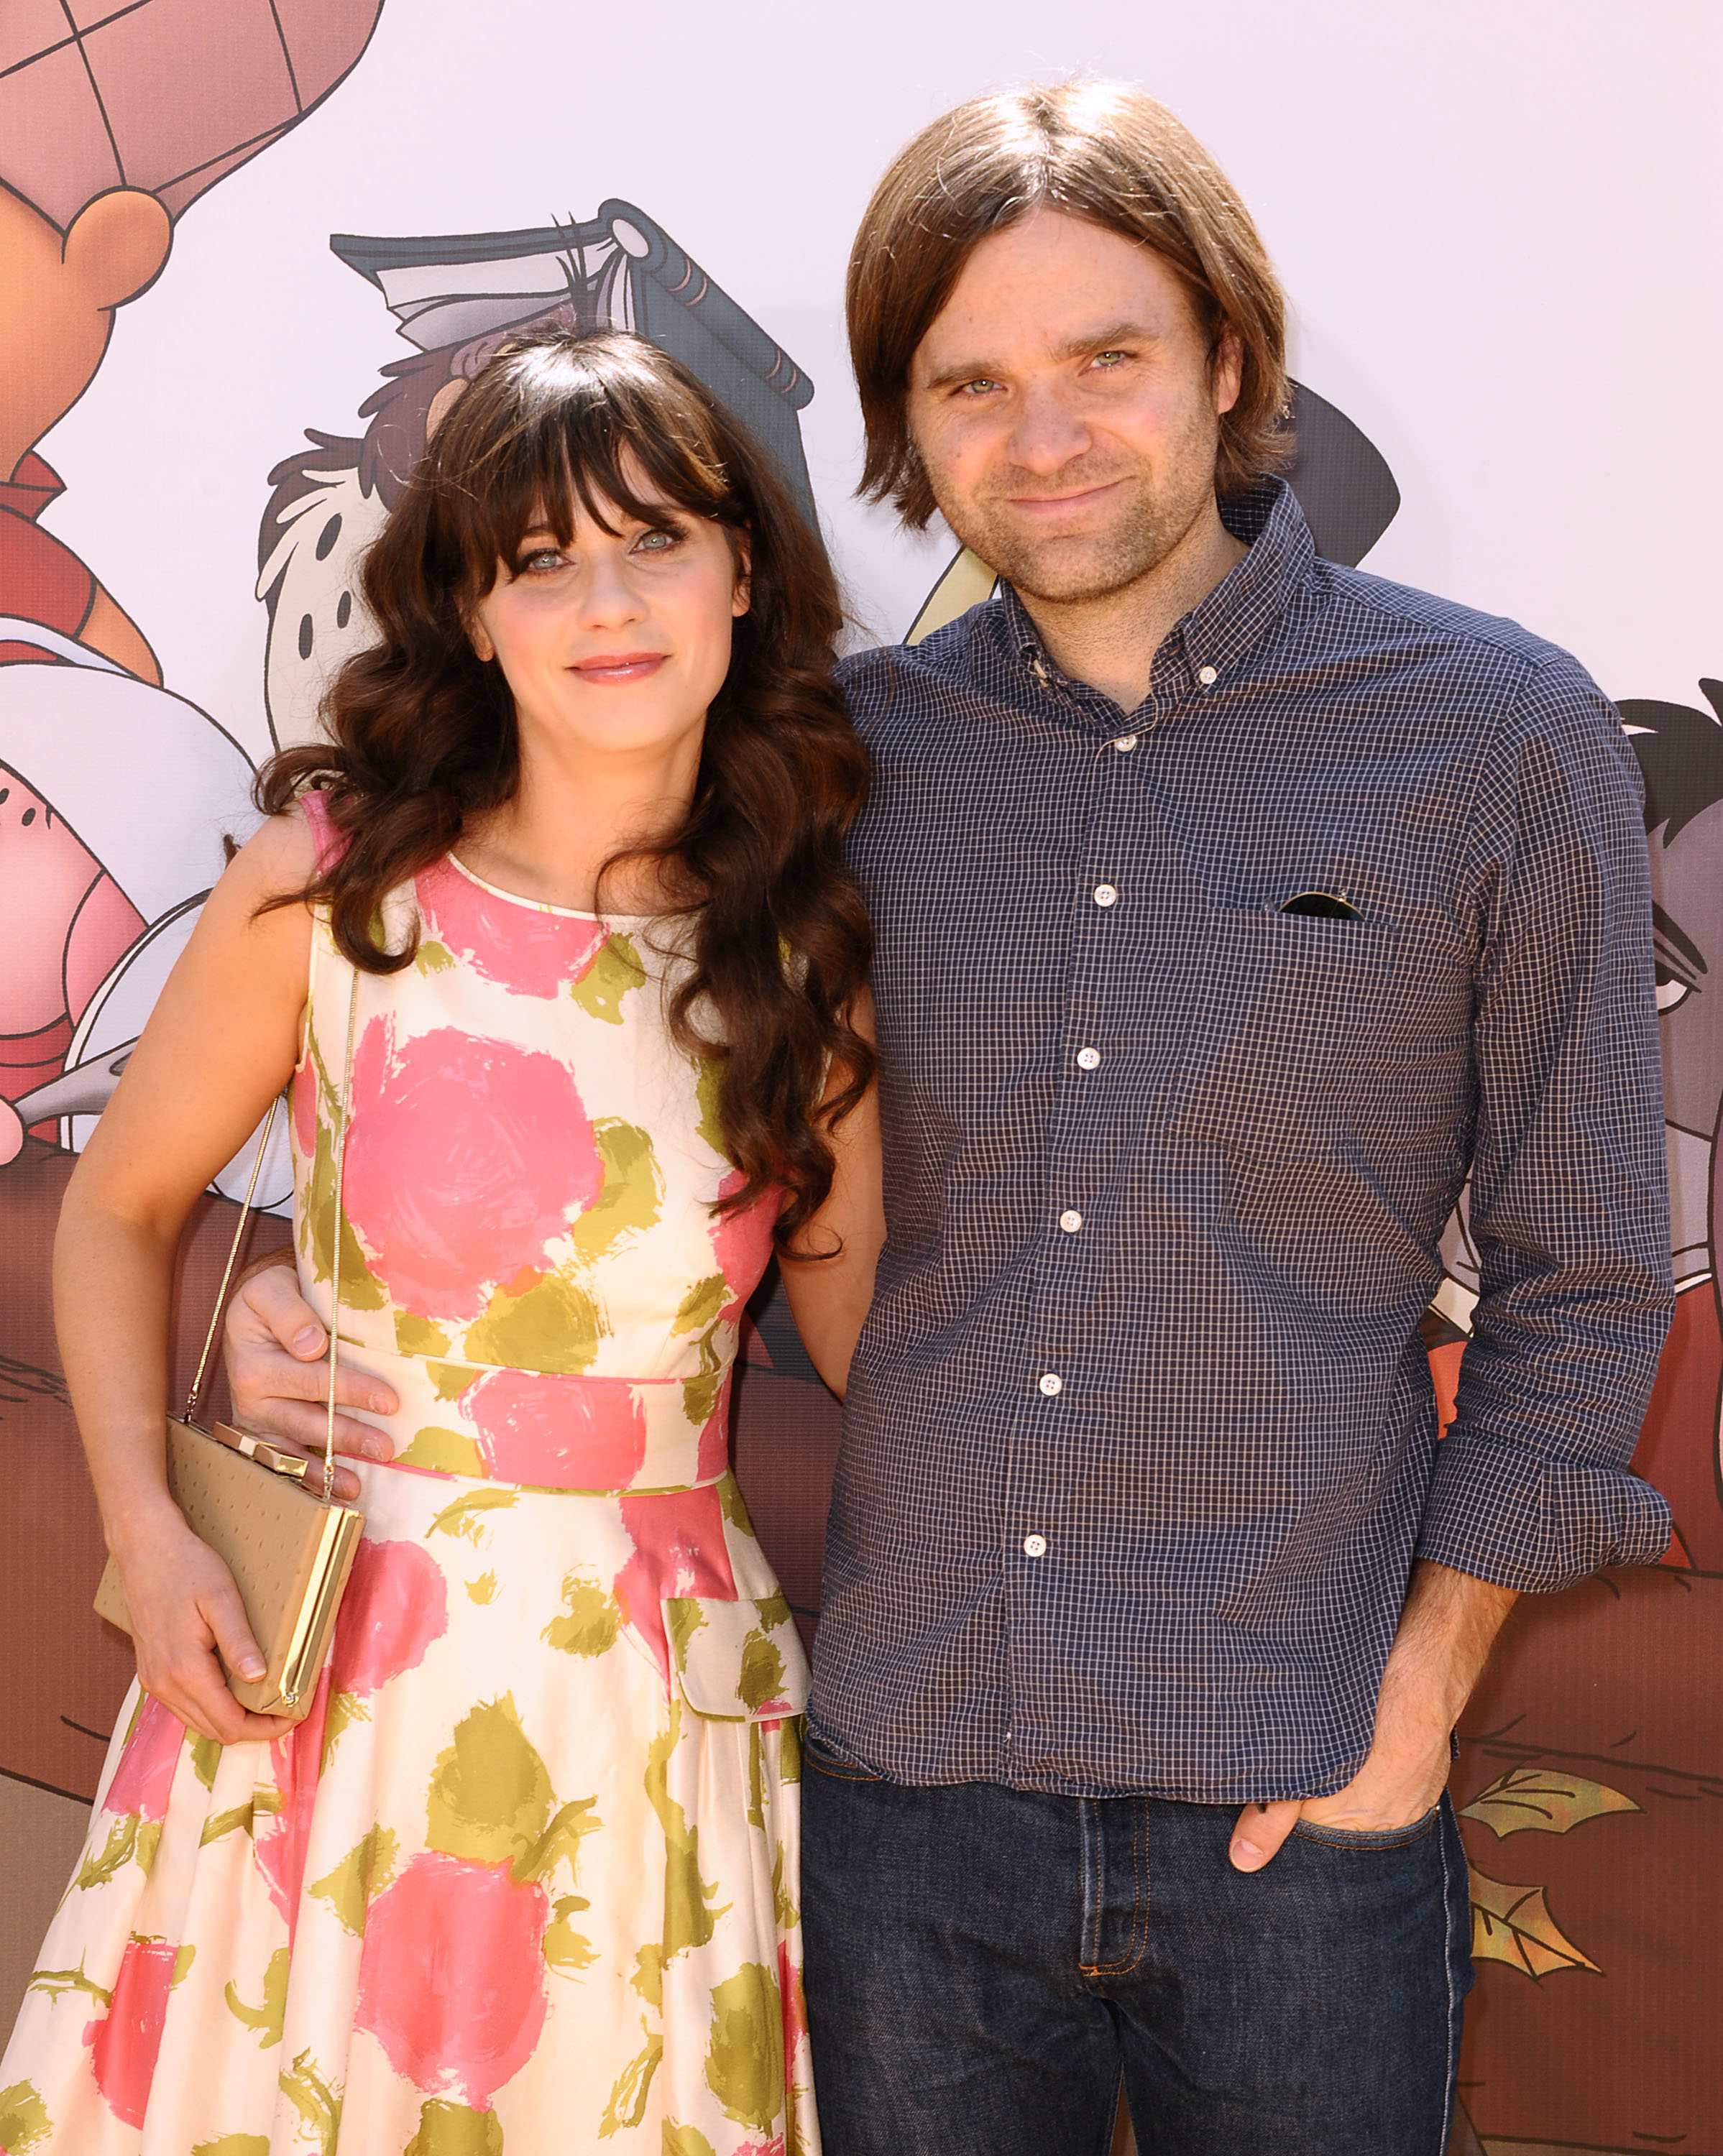 Zooey Deschanel and Ben Gibbard at the premiere of Winnie the Pooh